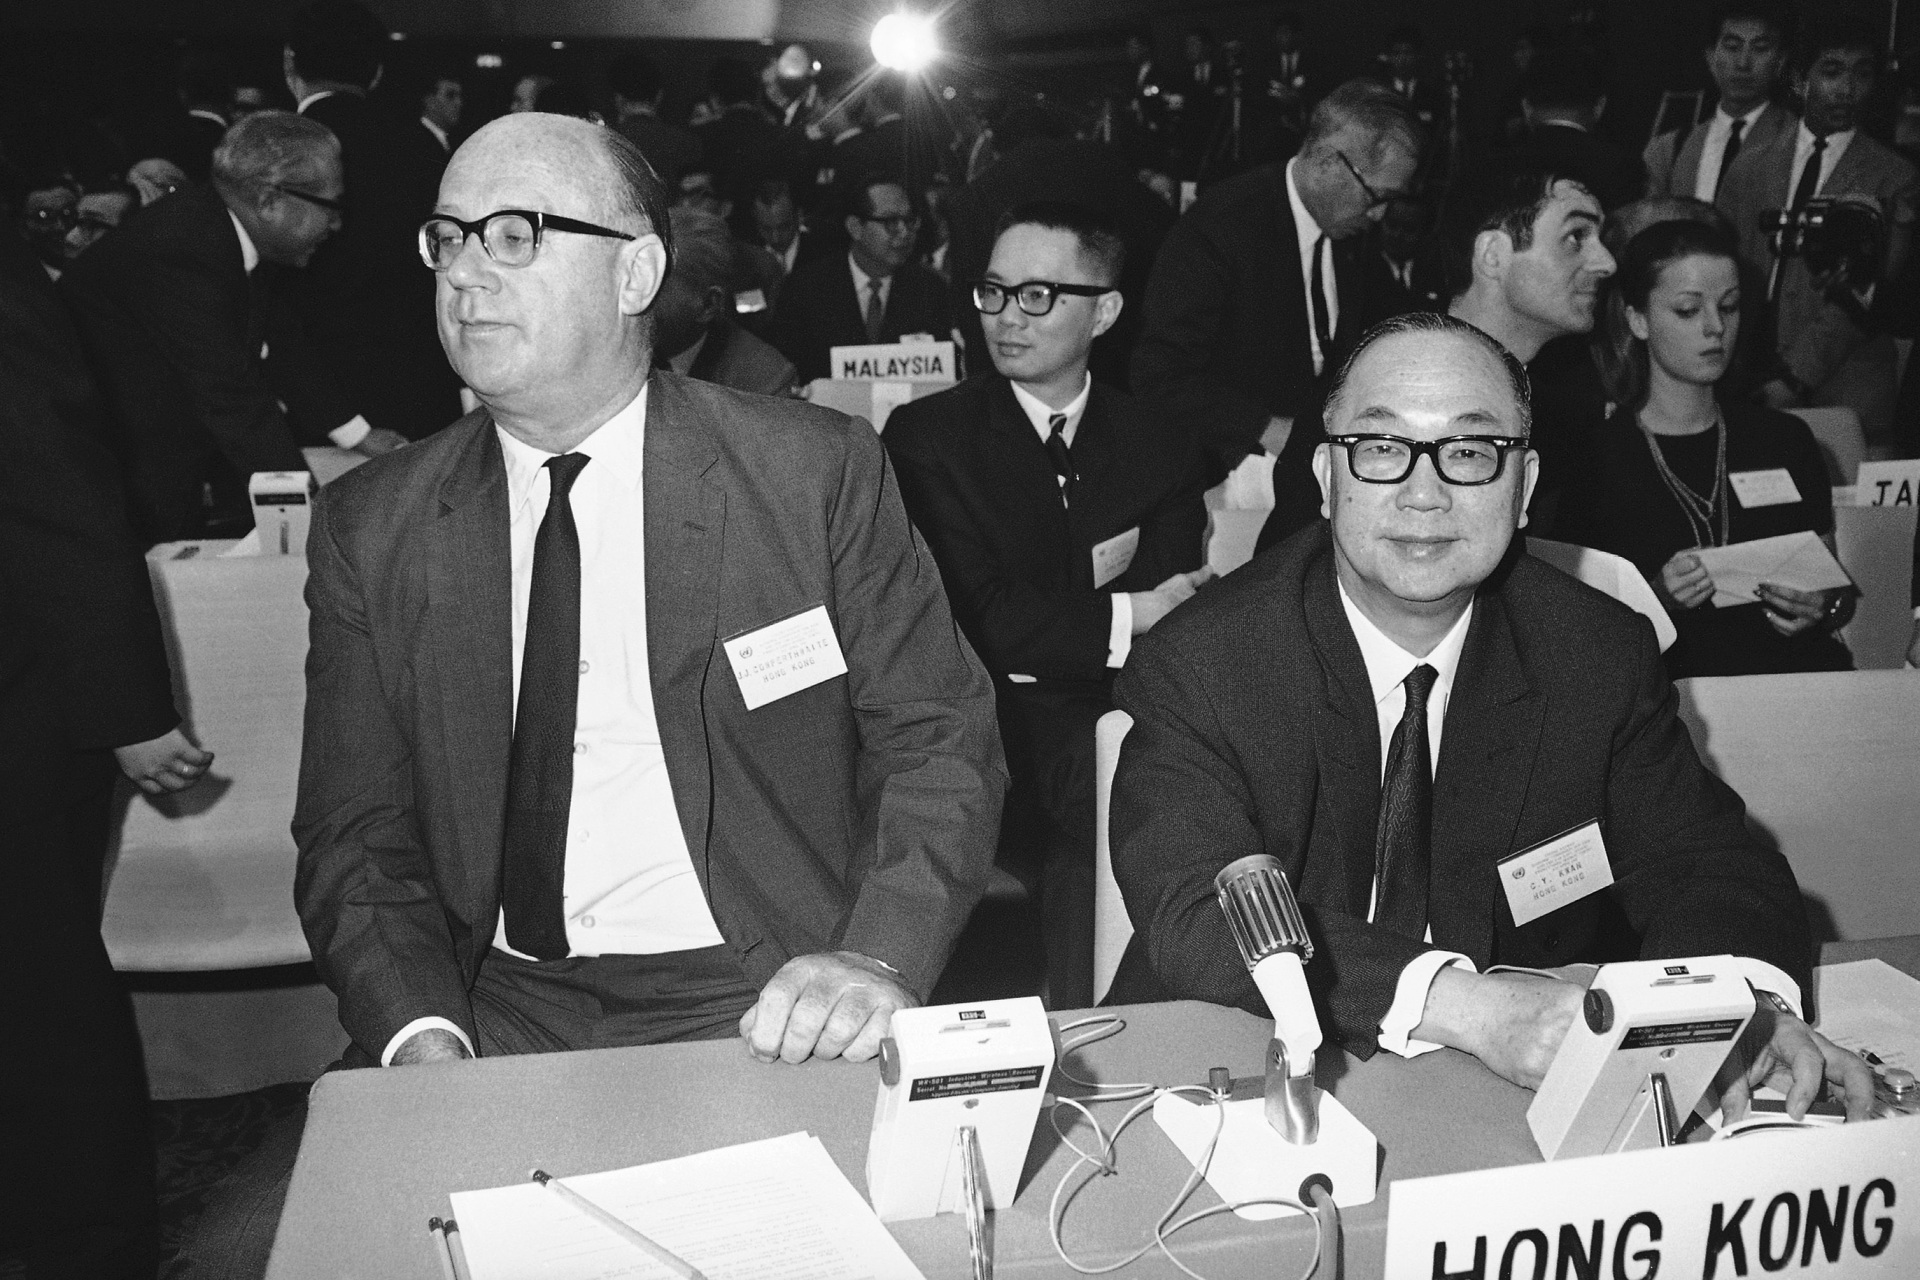 Hong Kong representatives John James Cowperthwaite, left, and C. Y. Kwan are at a meeting of the United Nations Economic Commission for Asia and the Far East in a Tokyo Hotel on April 3, 1967. (AP Photo)